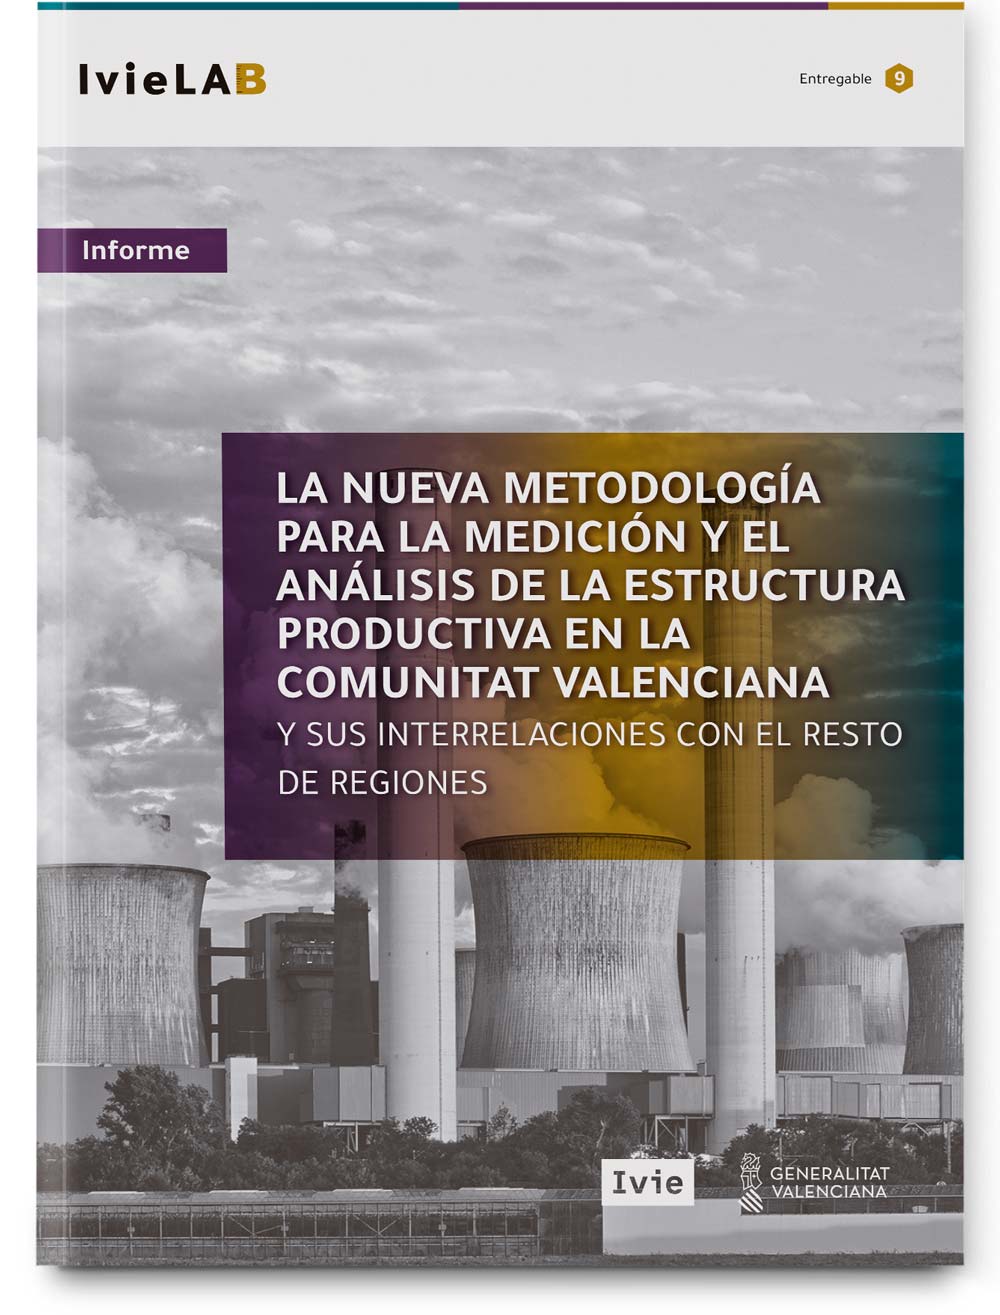 The new methodology for measuring and analyzing the productive sectors in the Valencian Community and their interrelationships with the rest of the regions